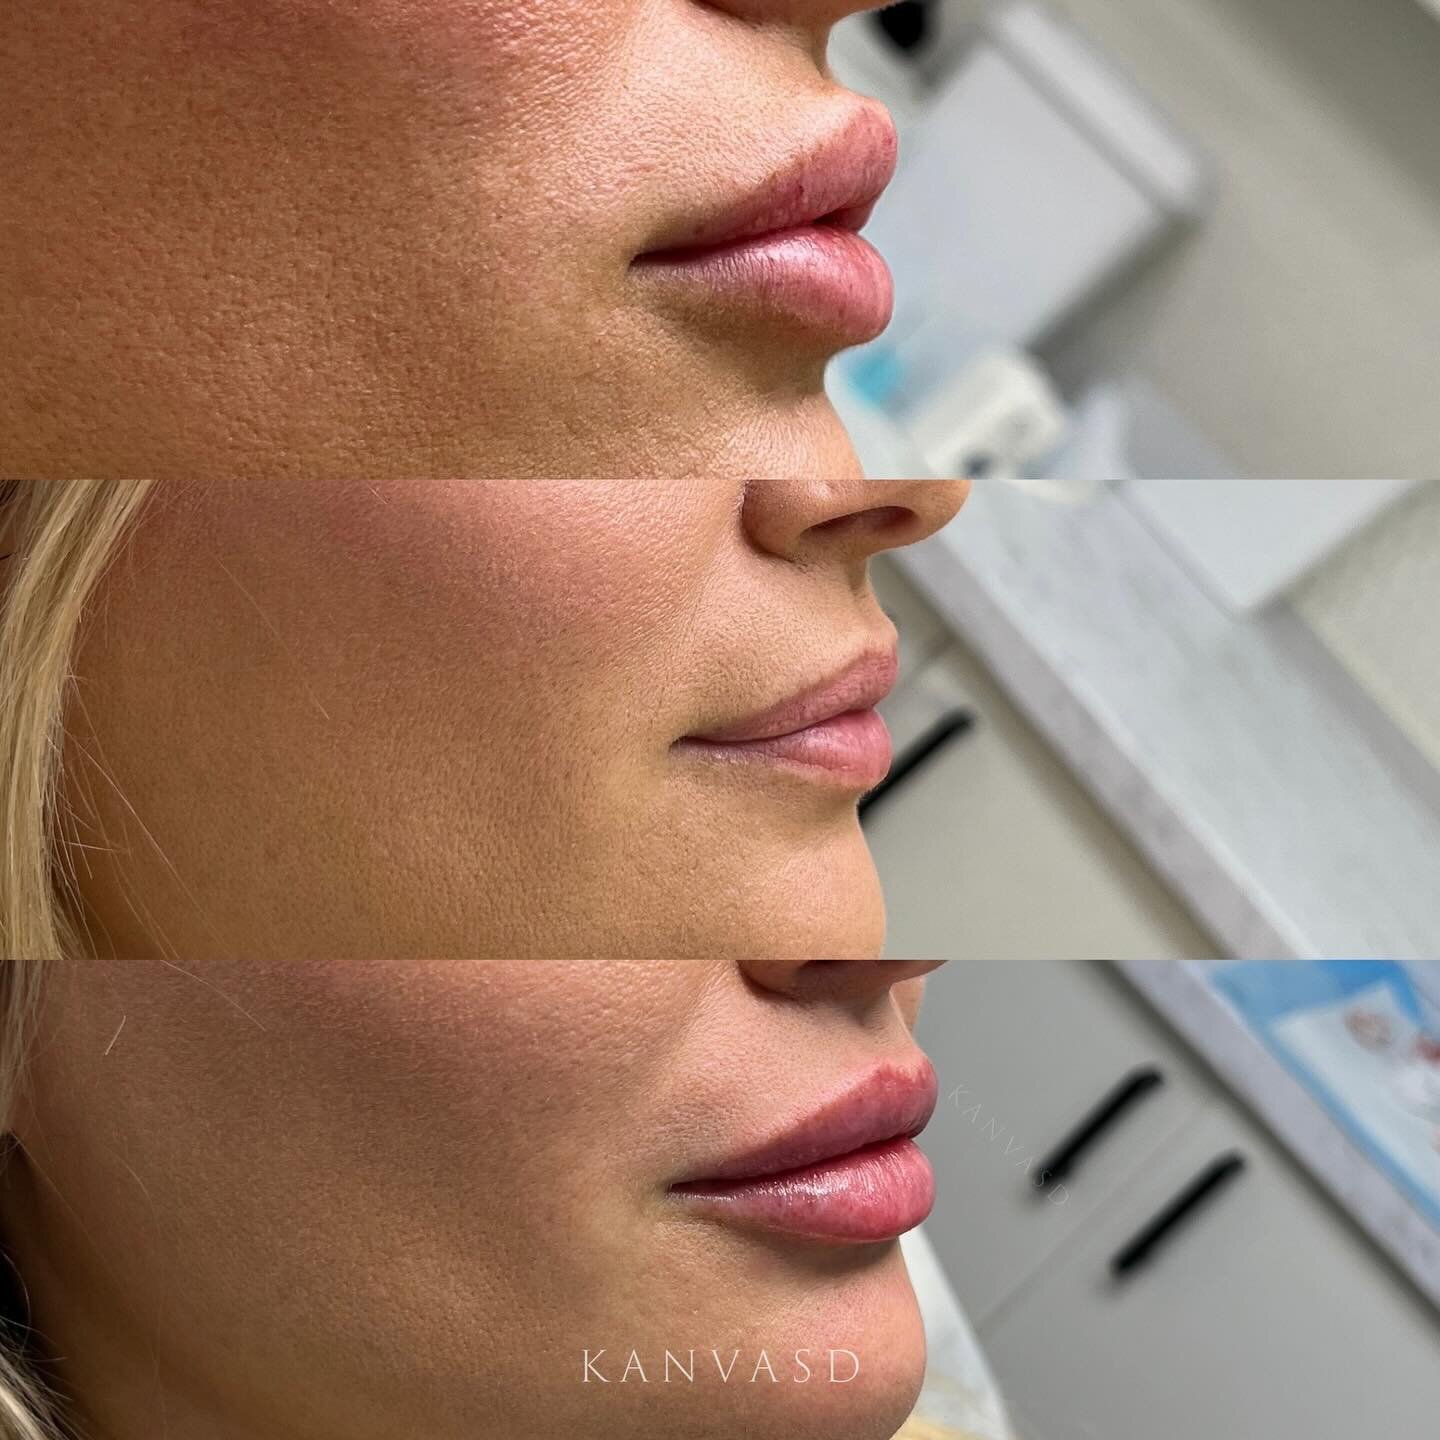 At Kanvasd, we provide a tailored and unique treatment plan for each individual. Our nurses specialise in assessing facial anatomy and can provide personalised consultations regarding facial rejuvenation.

Practitioner: Registered Nurse Kayleigh

For